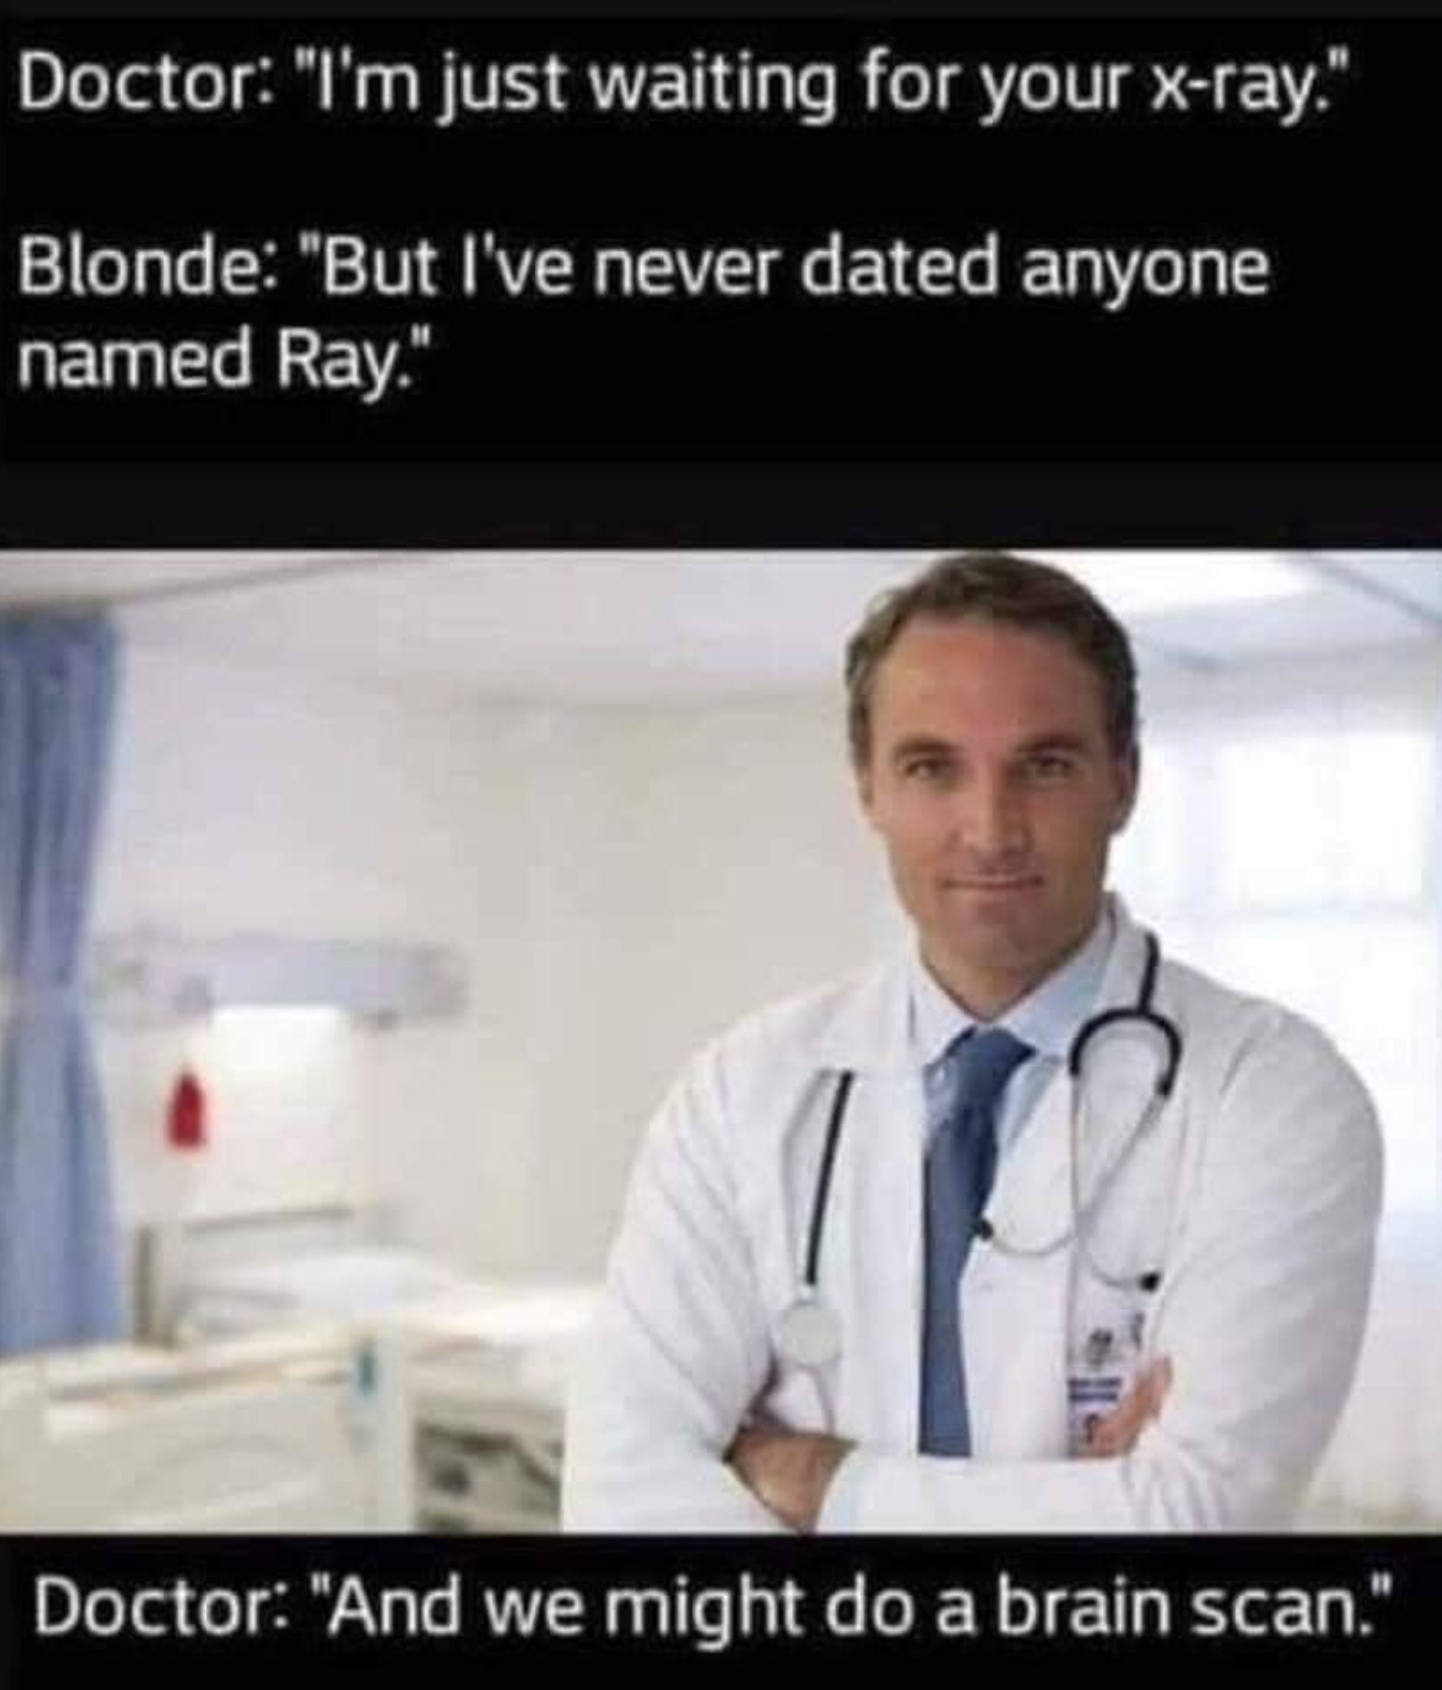 x ray doctor meme - Doctor "I'm just waiting for your xray." Blonde "But I've never dated anyone named Ray." Doctor "And we might do a brain scan."